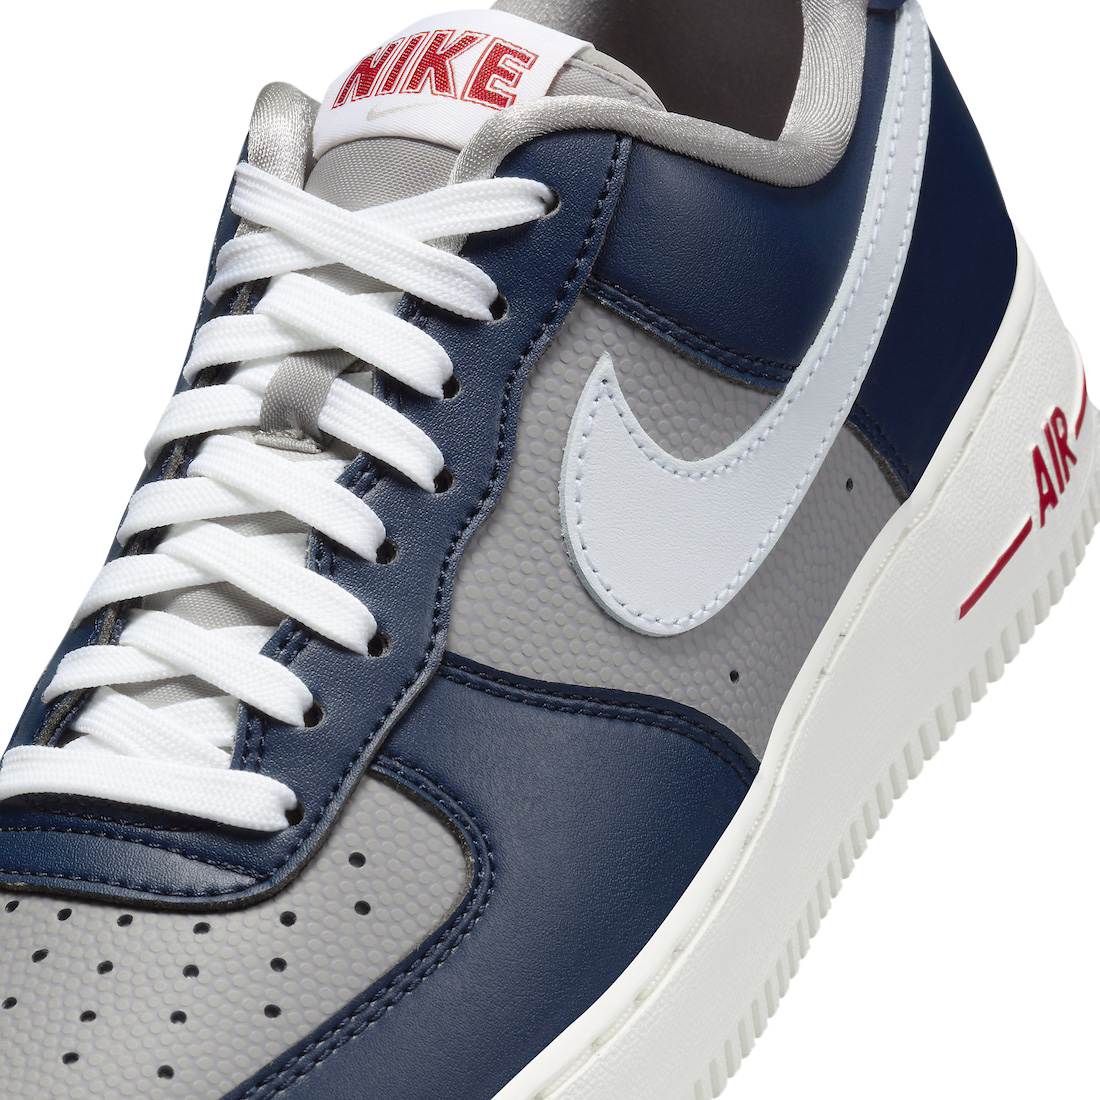 Nike WMNS Air Force 1 Low Be True To Her School College Navy FJ1408-400